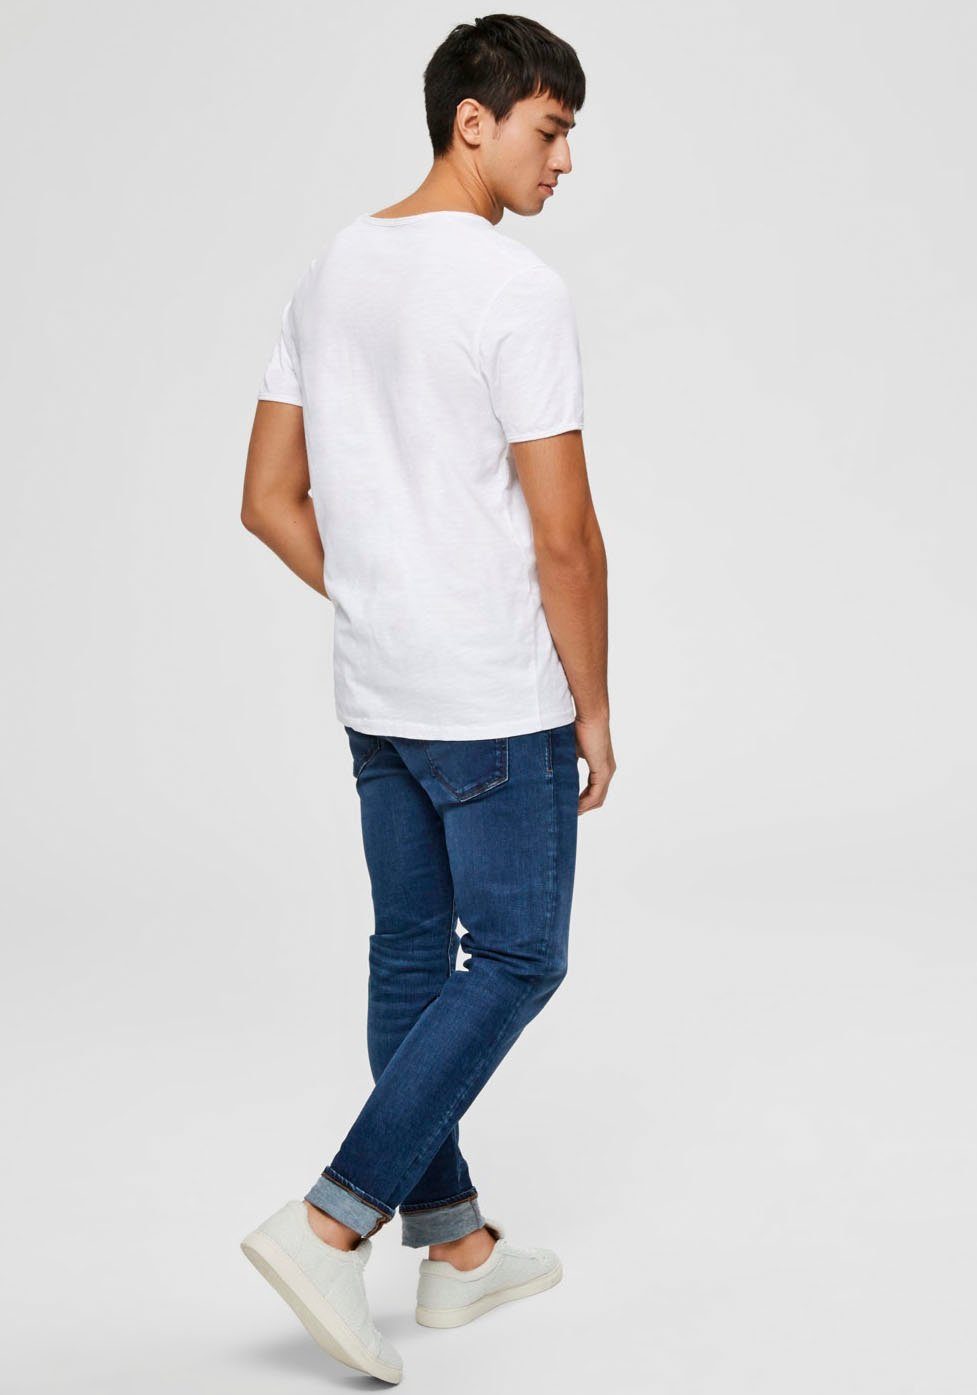 SELECTED HOMME T-Shirt MORGAN O-NECK Bright TEE White